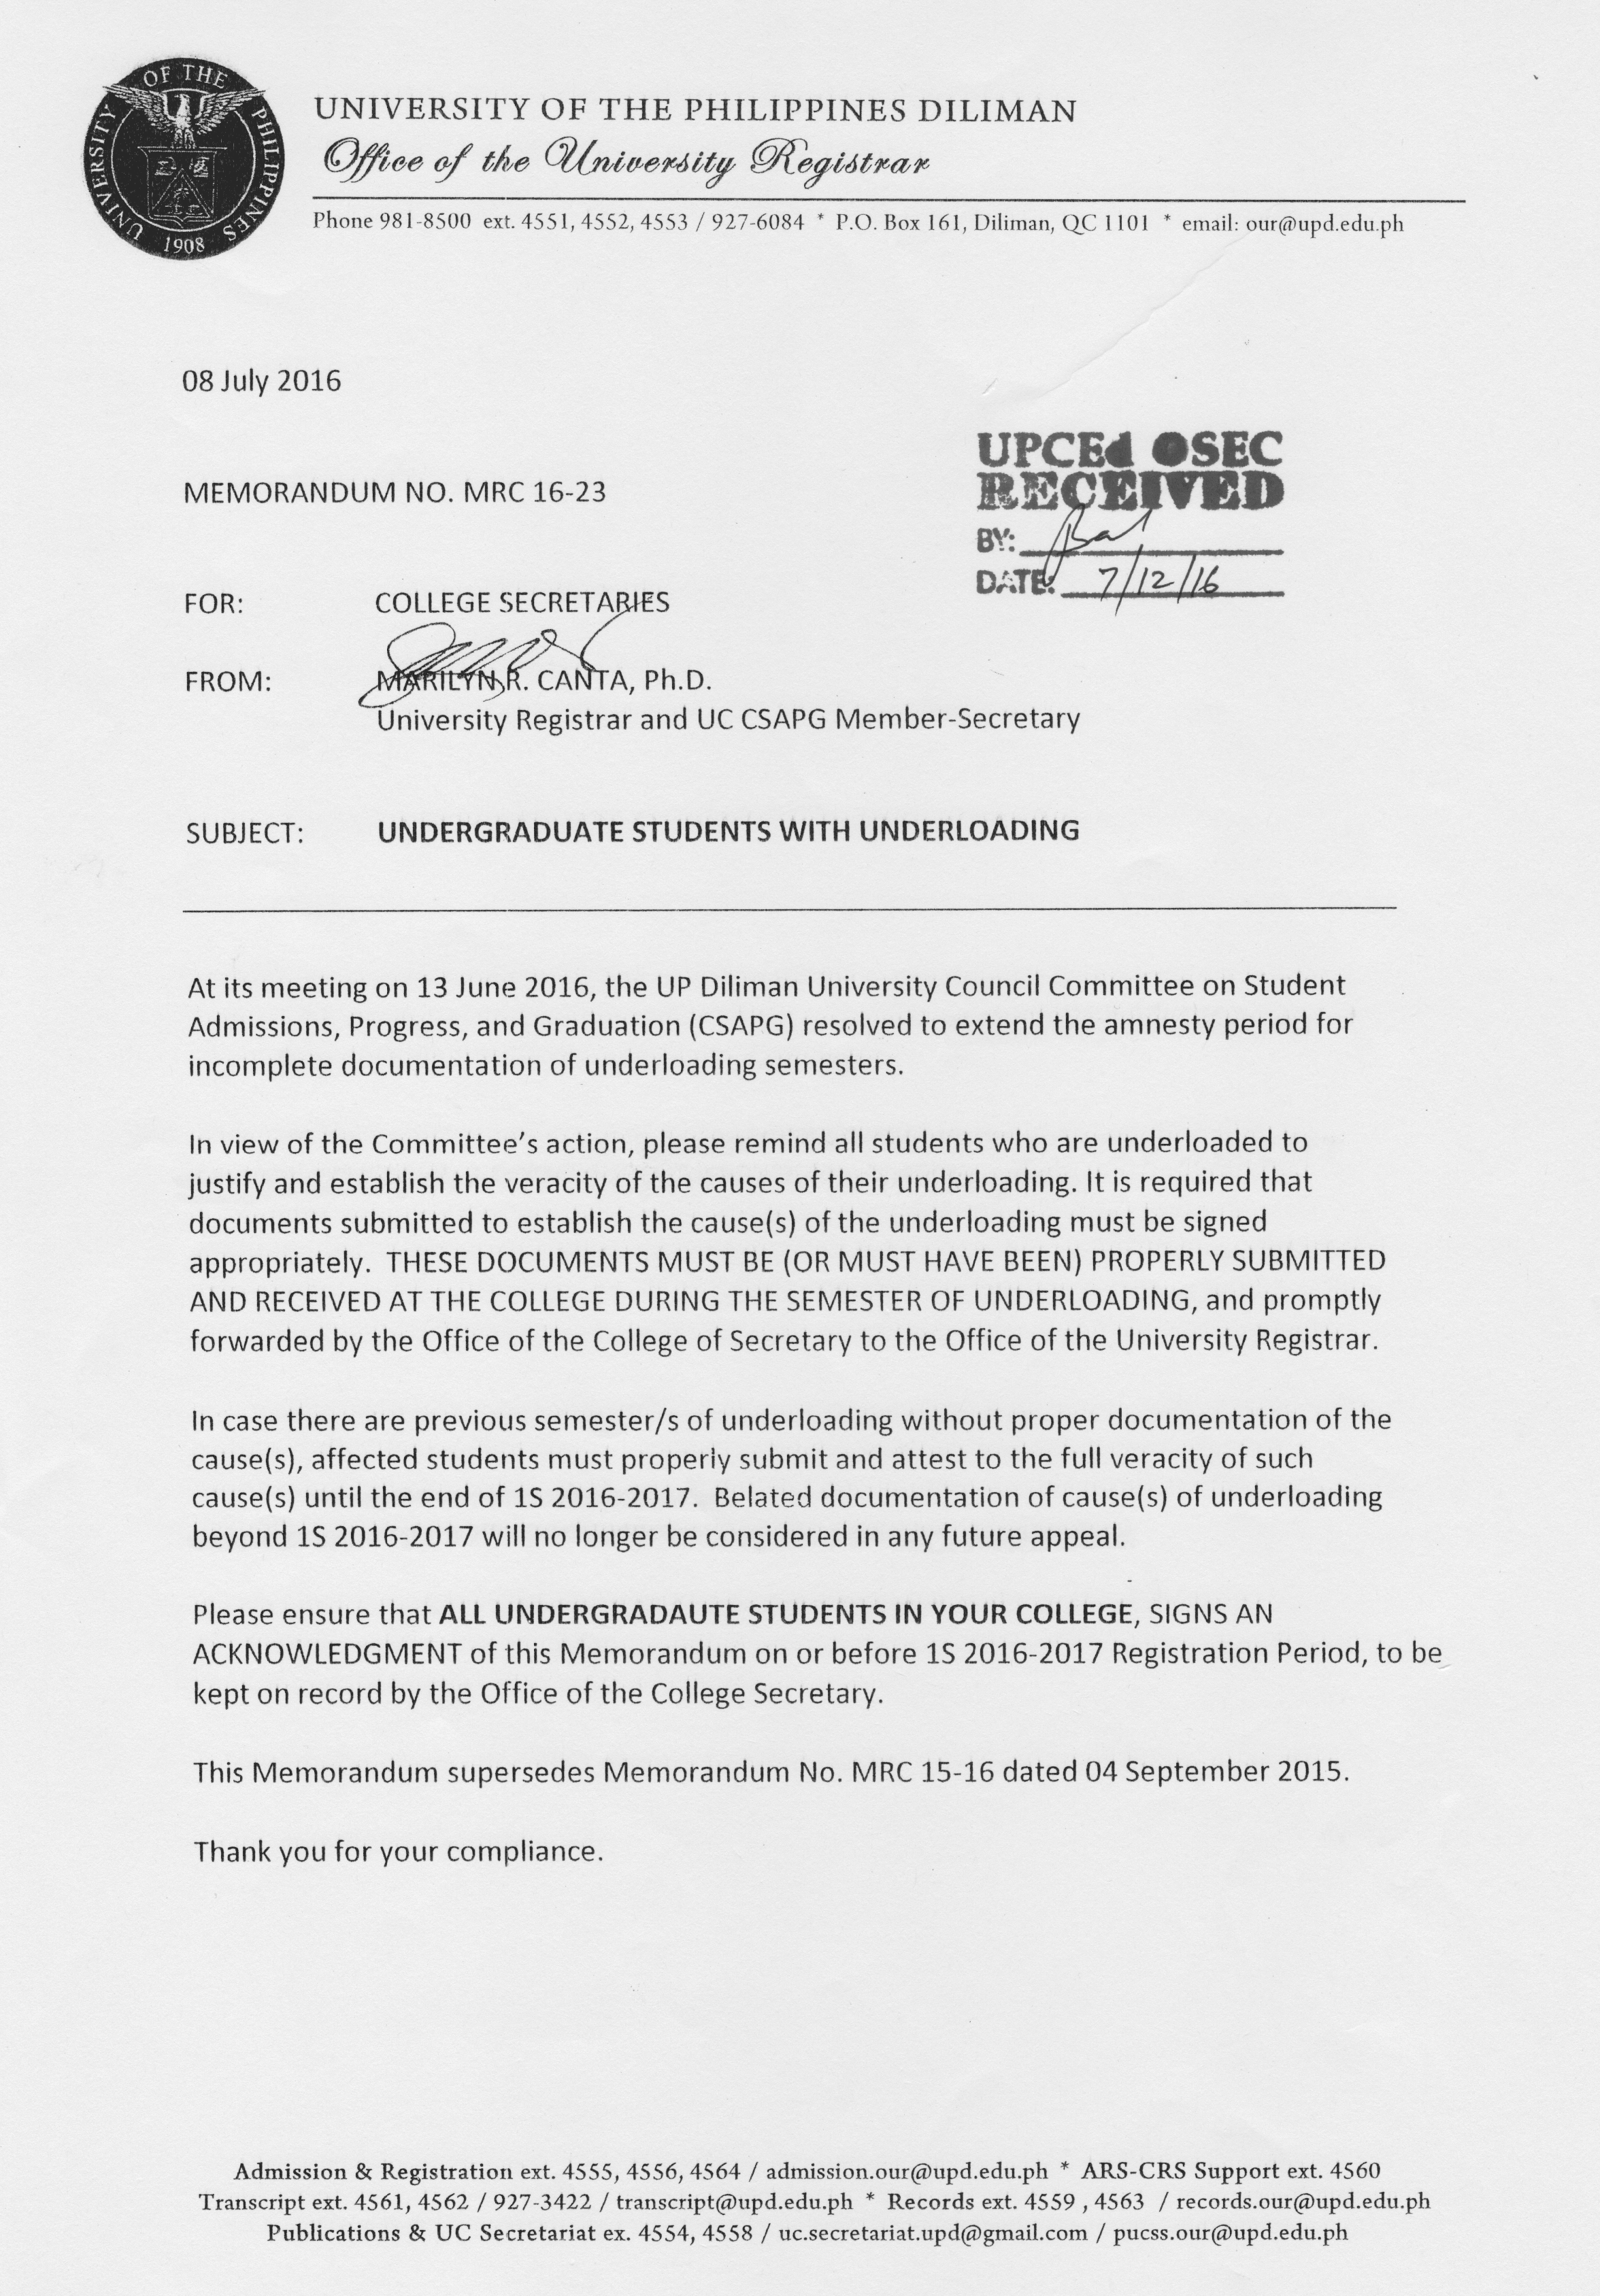 Memorandum No. ECLV-23-003: Suspension of Classes for the Alternative  Classroom Learning Experience 2023 - University of the Philippines Diliman